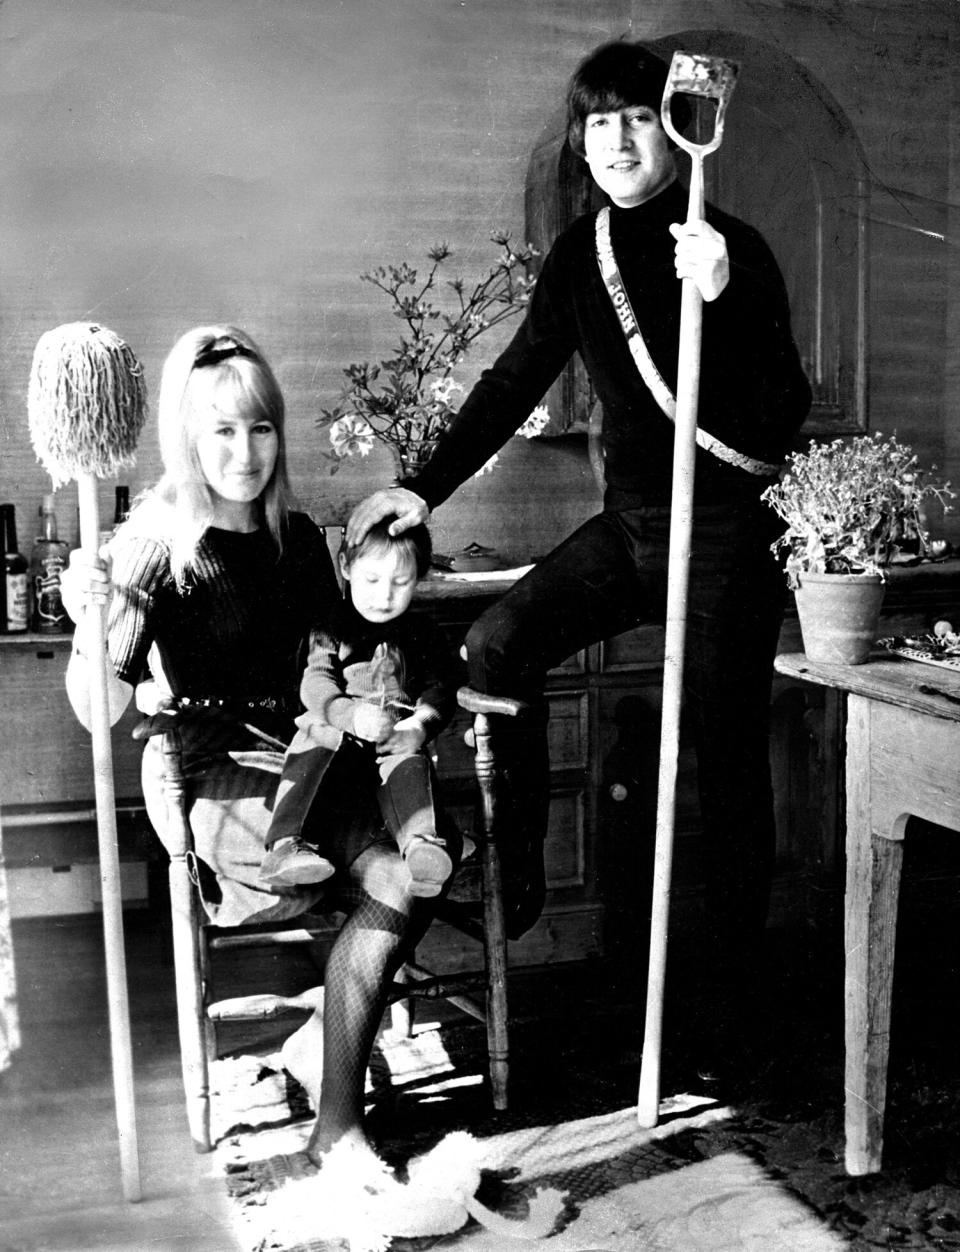 JOHN LENNON with his wife CYNTHIA &amp; son JULIAN in their secret home just outside London